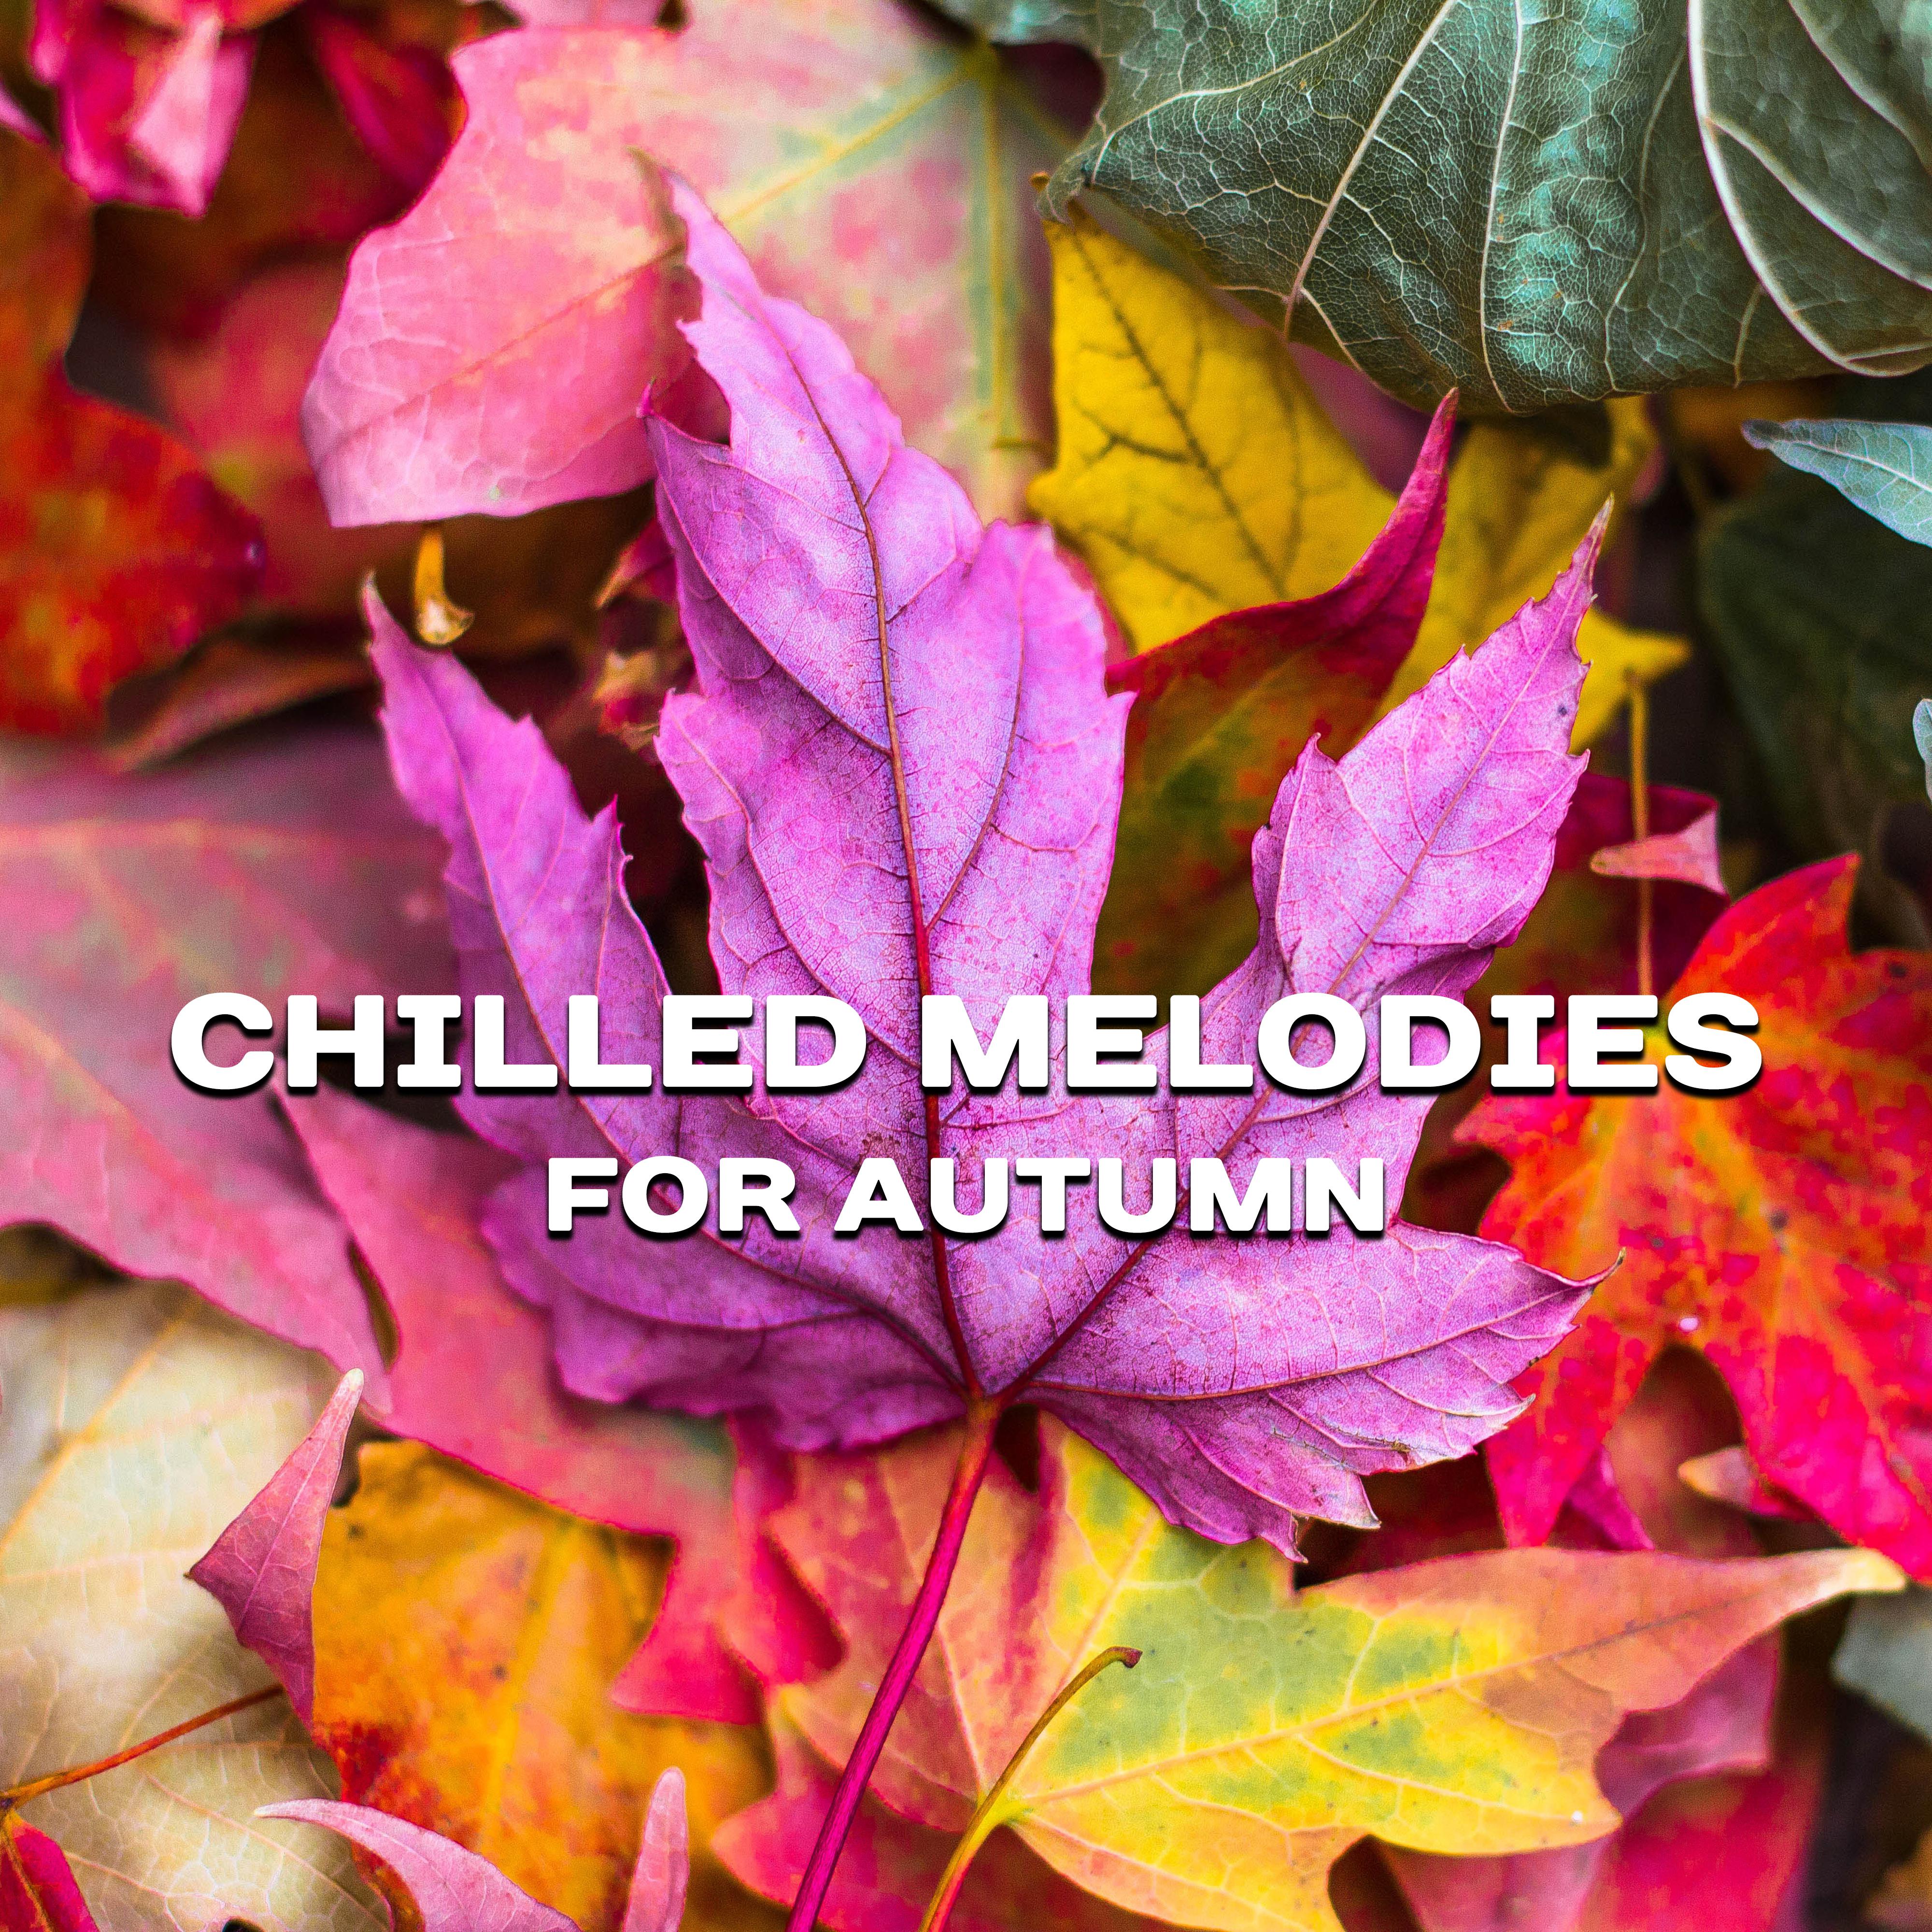 Chilled Melodies for Autumn